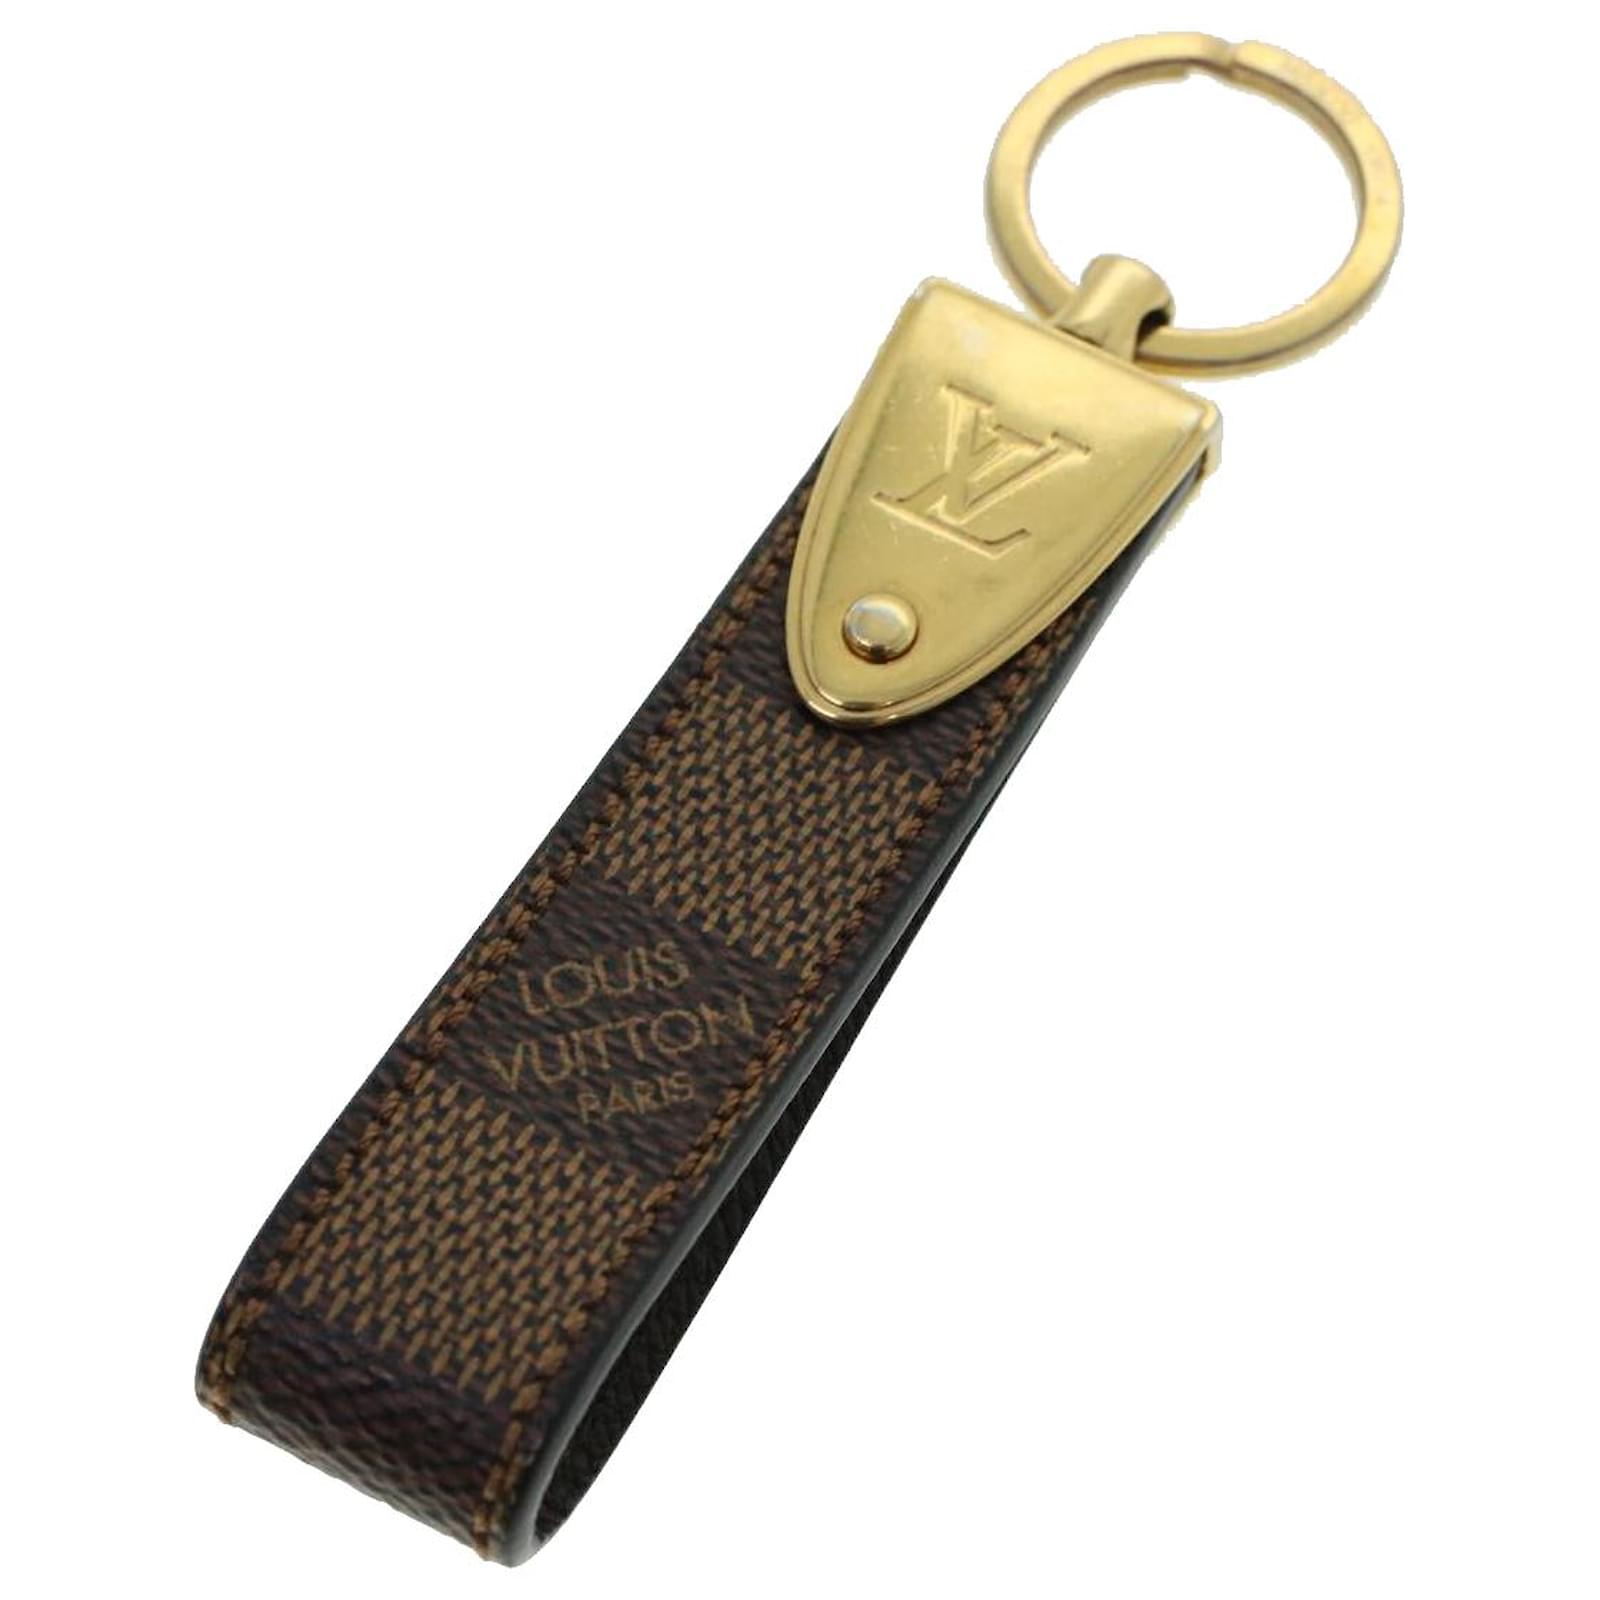 LOUIS VUITTON Porte Cles Blooming Flower BB Key Holder Pink M63085 LV Auth  hk723